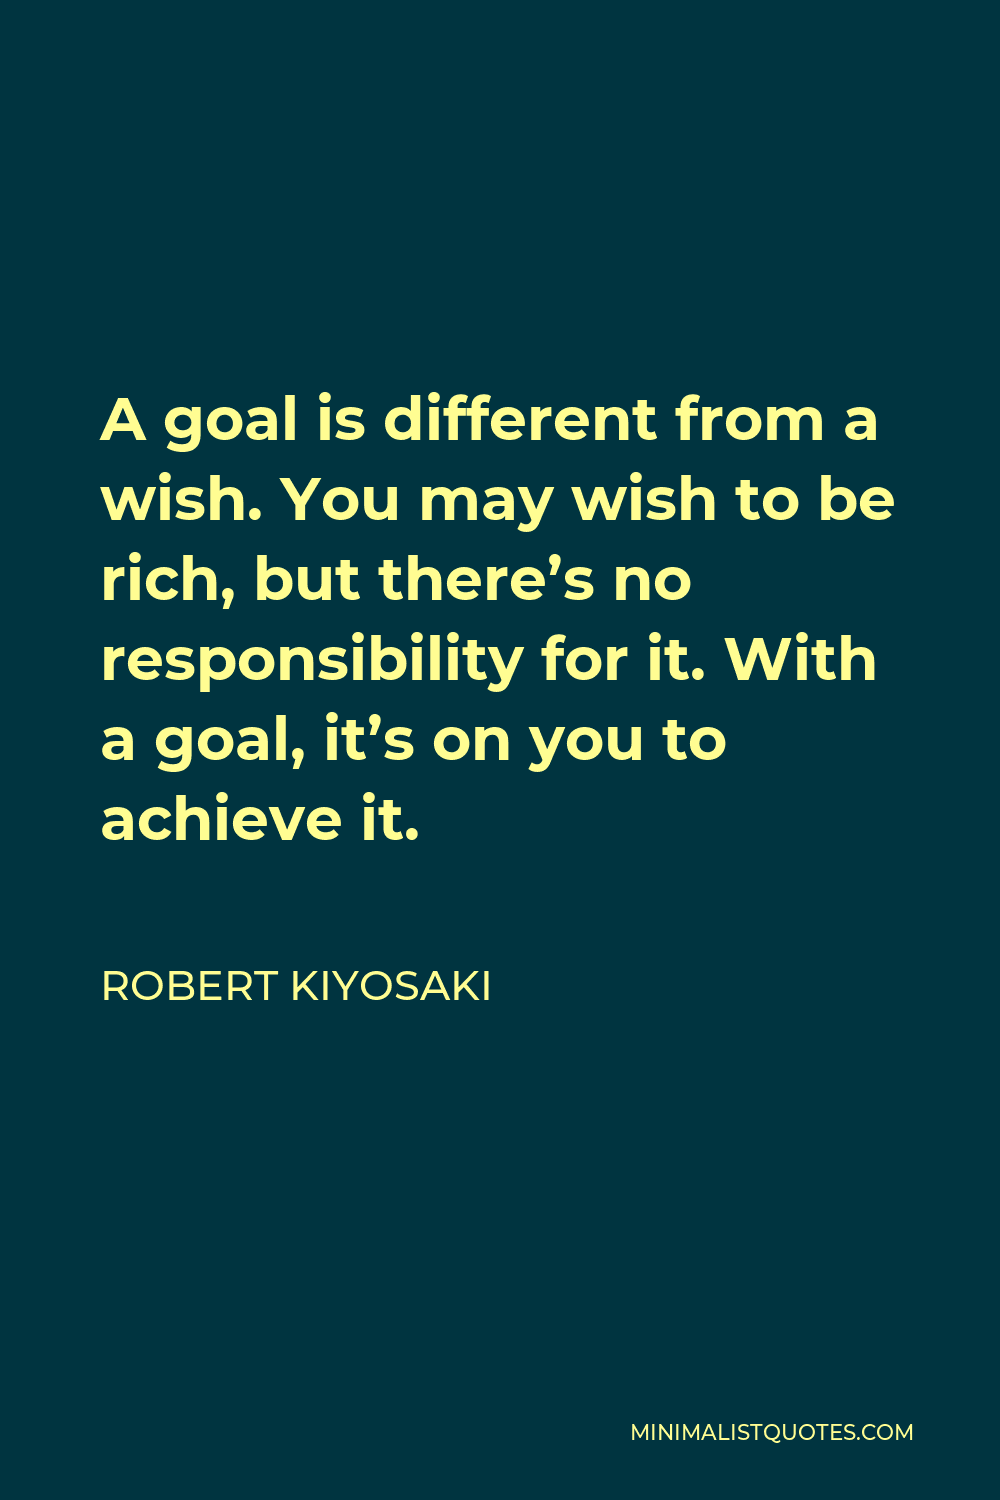 Robert Kiyosaki Quote - A goal is different from a wish. You may wish to be rich, but there’s no responsibility for it. With a goal, it’s on you to achieve it.